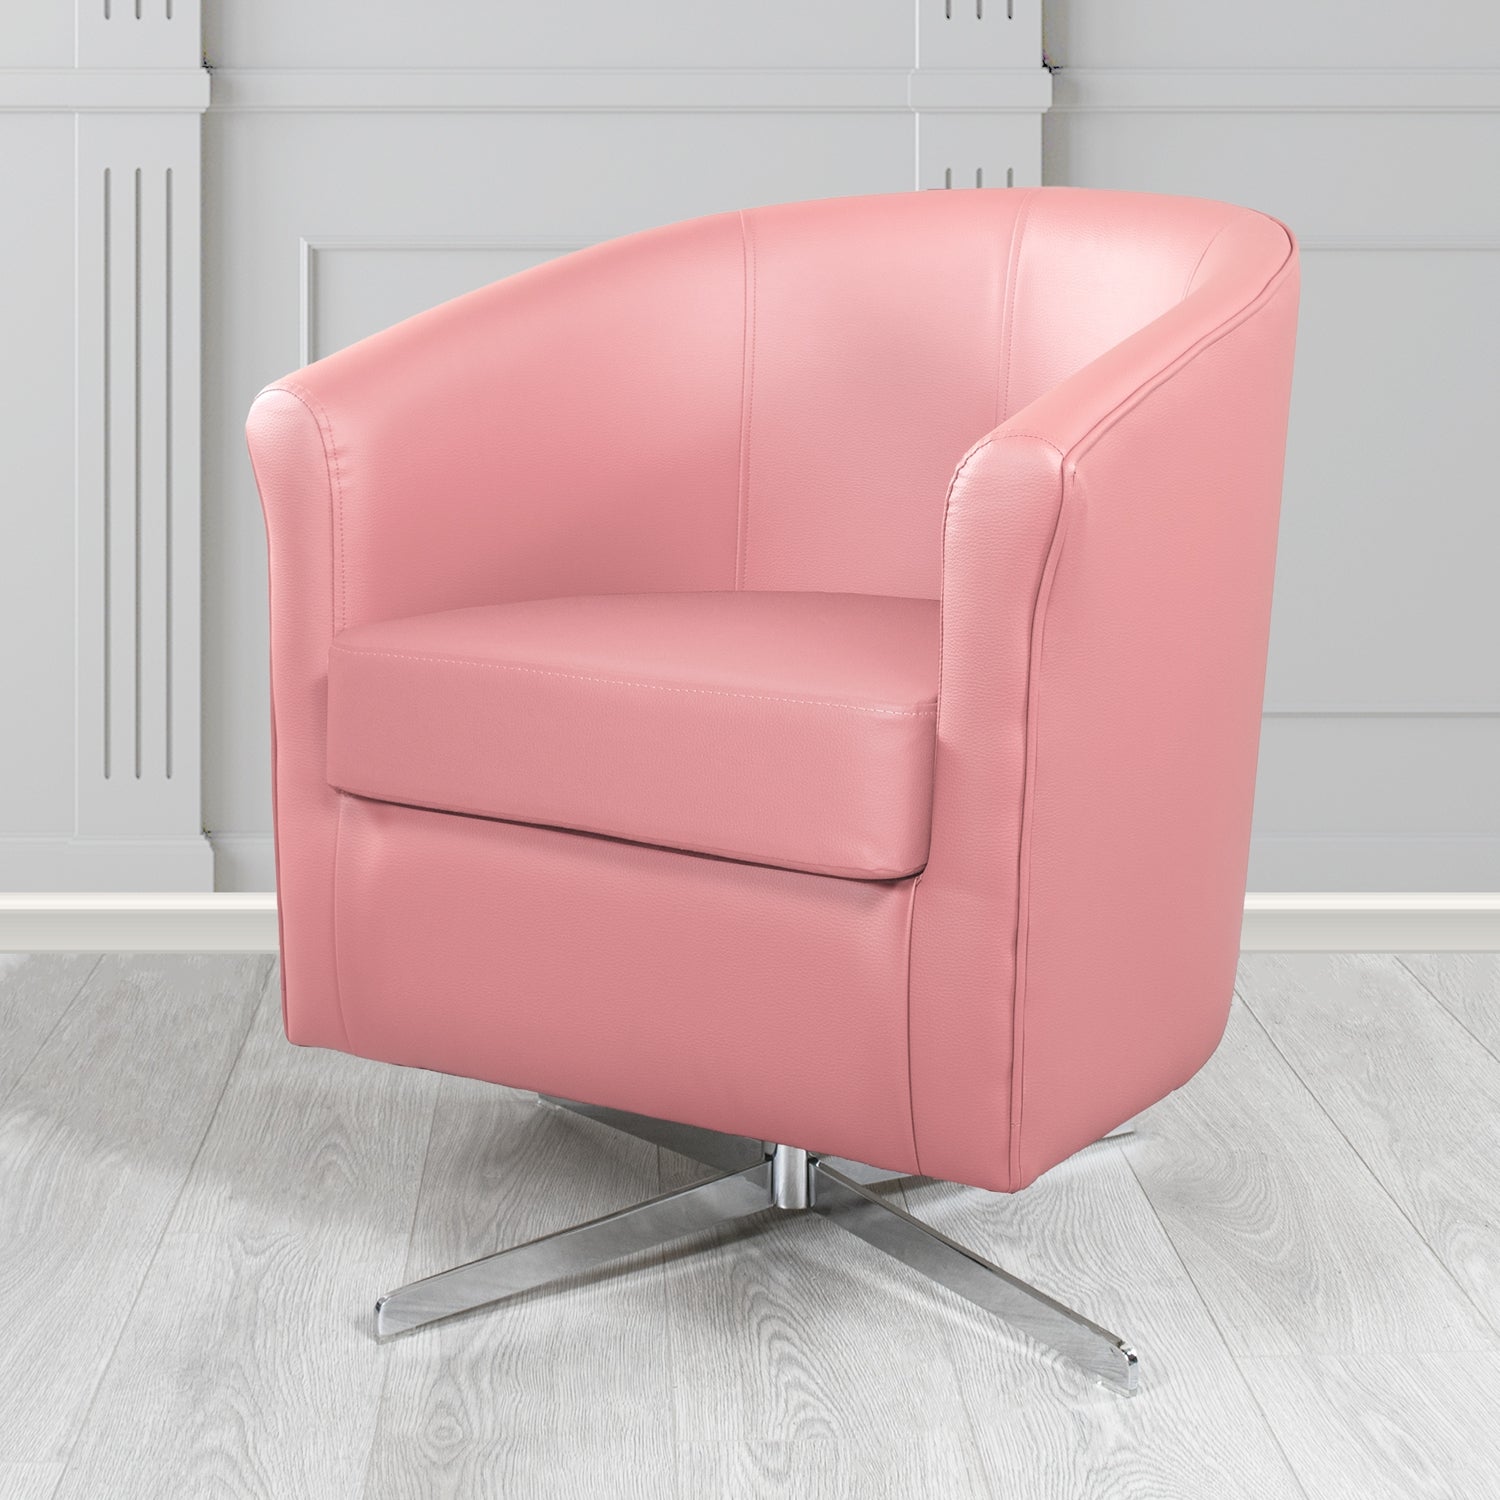 Cannes Swivel Tub Chair in Just Colour Cherry Blossom Crib 5 Faux Leather - The Tub Chair Shop